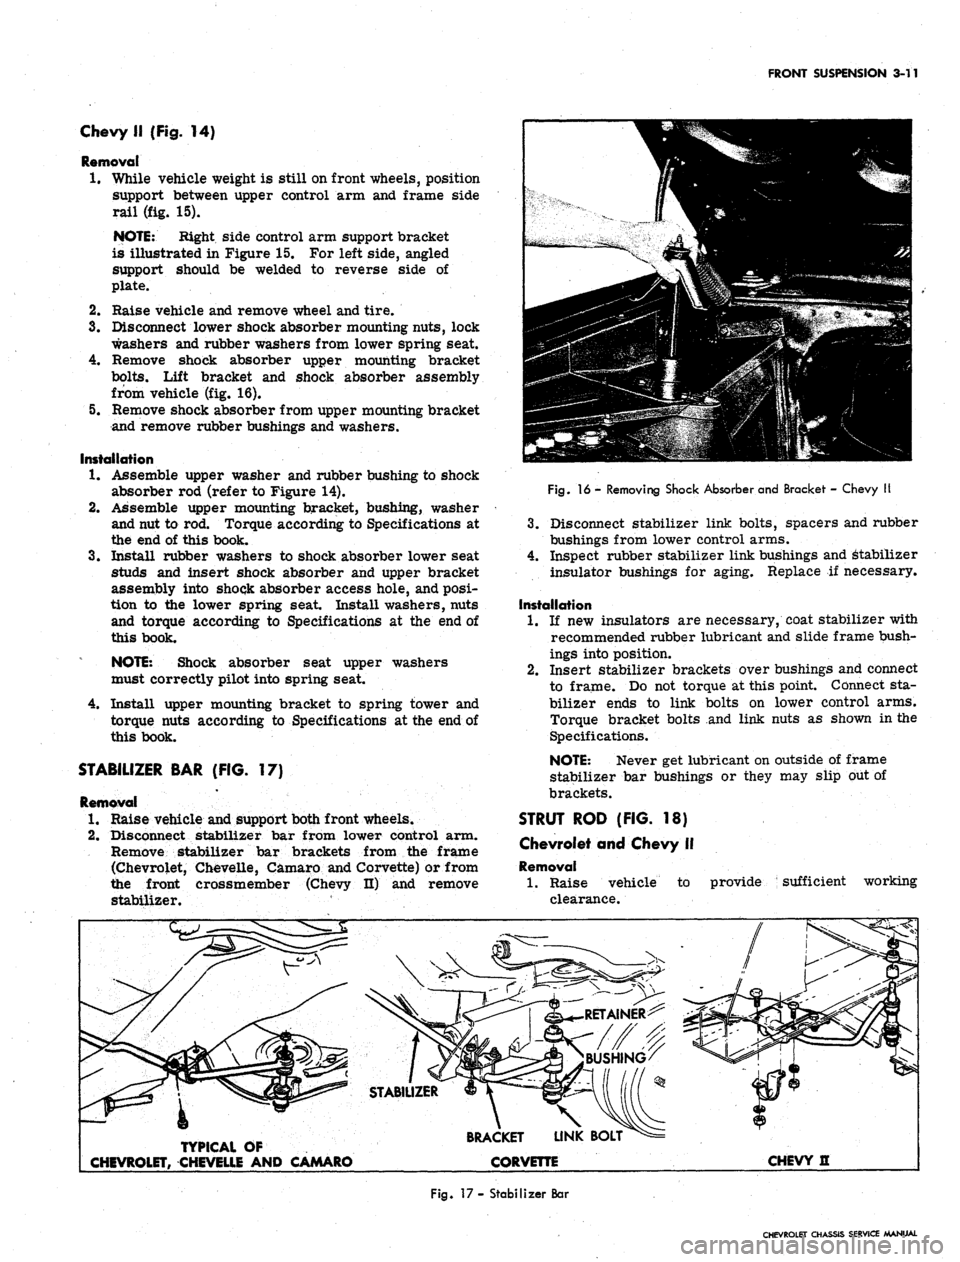 CHEVROLET CAMARO 1967 1.G Chassis User Guide 
FRONT SUSPENSION 3-11

Chevy II (Fig. 14)

Removal

1.
 While vehicle weight is still on front wheels, position

support between upper control arm and frame side

rail (fig. 15).

NOTE: Bight side co